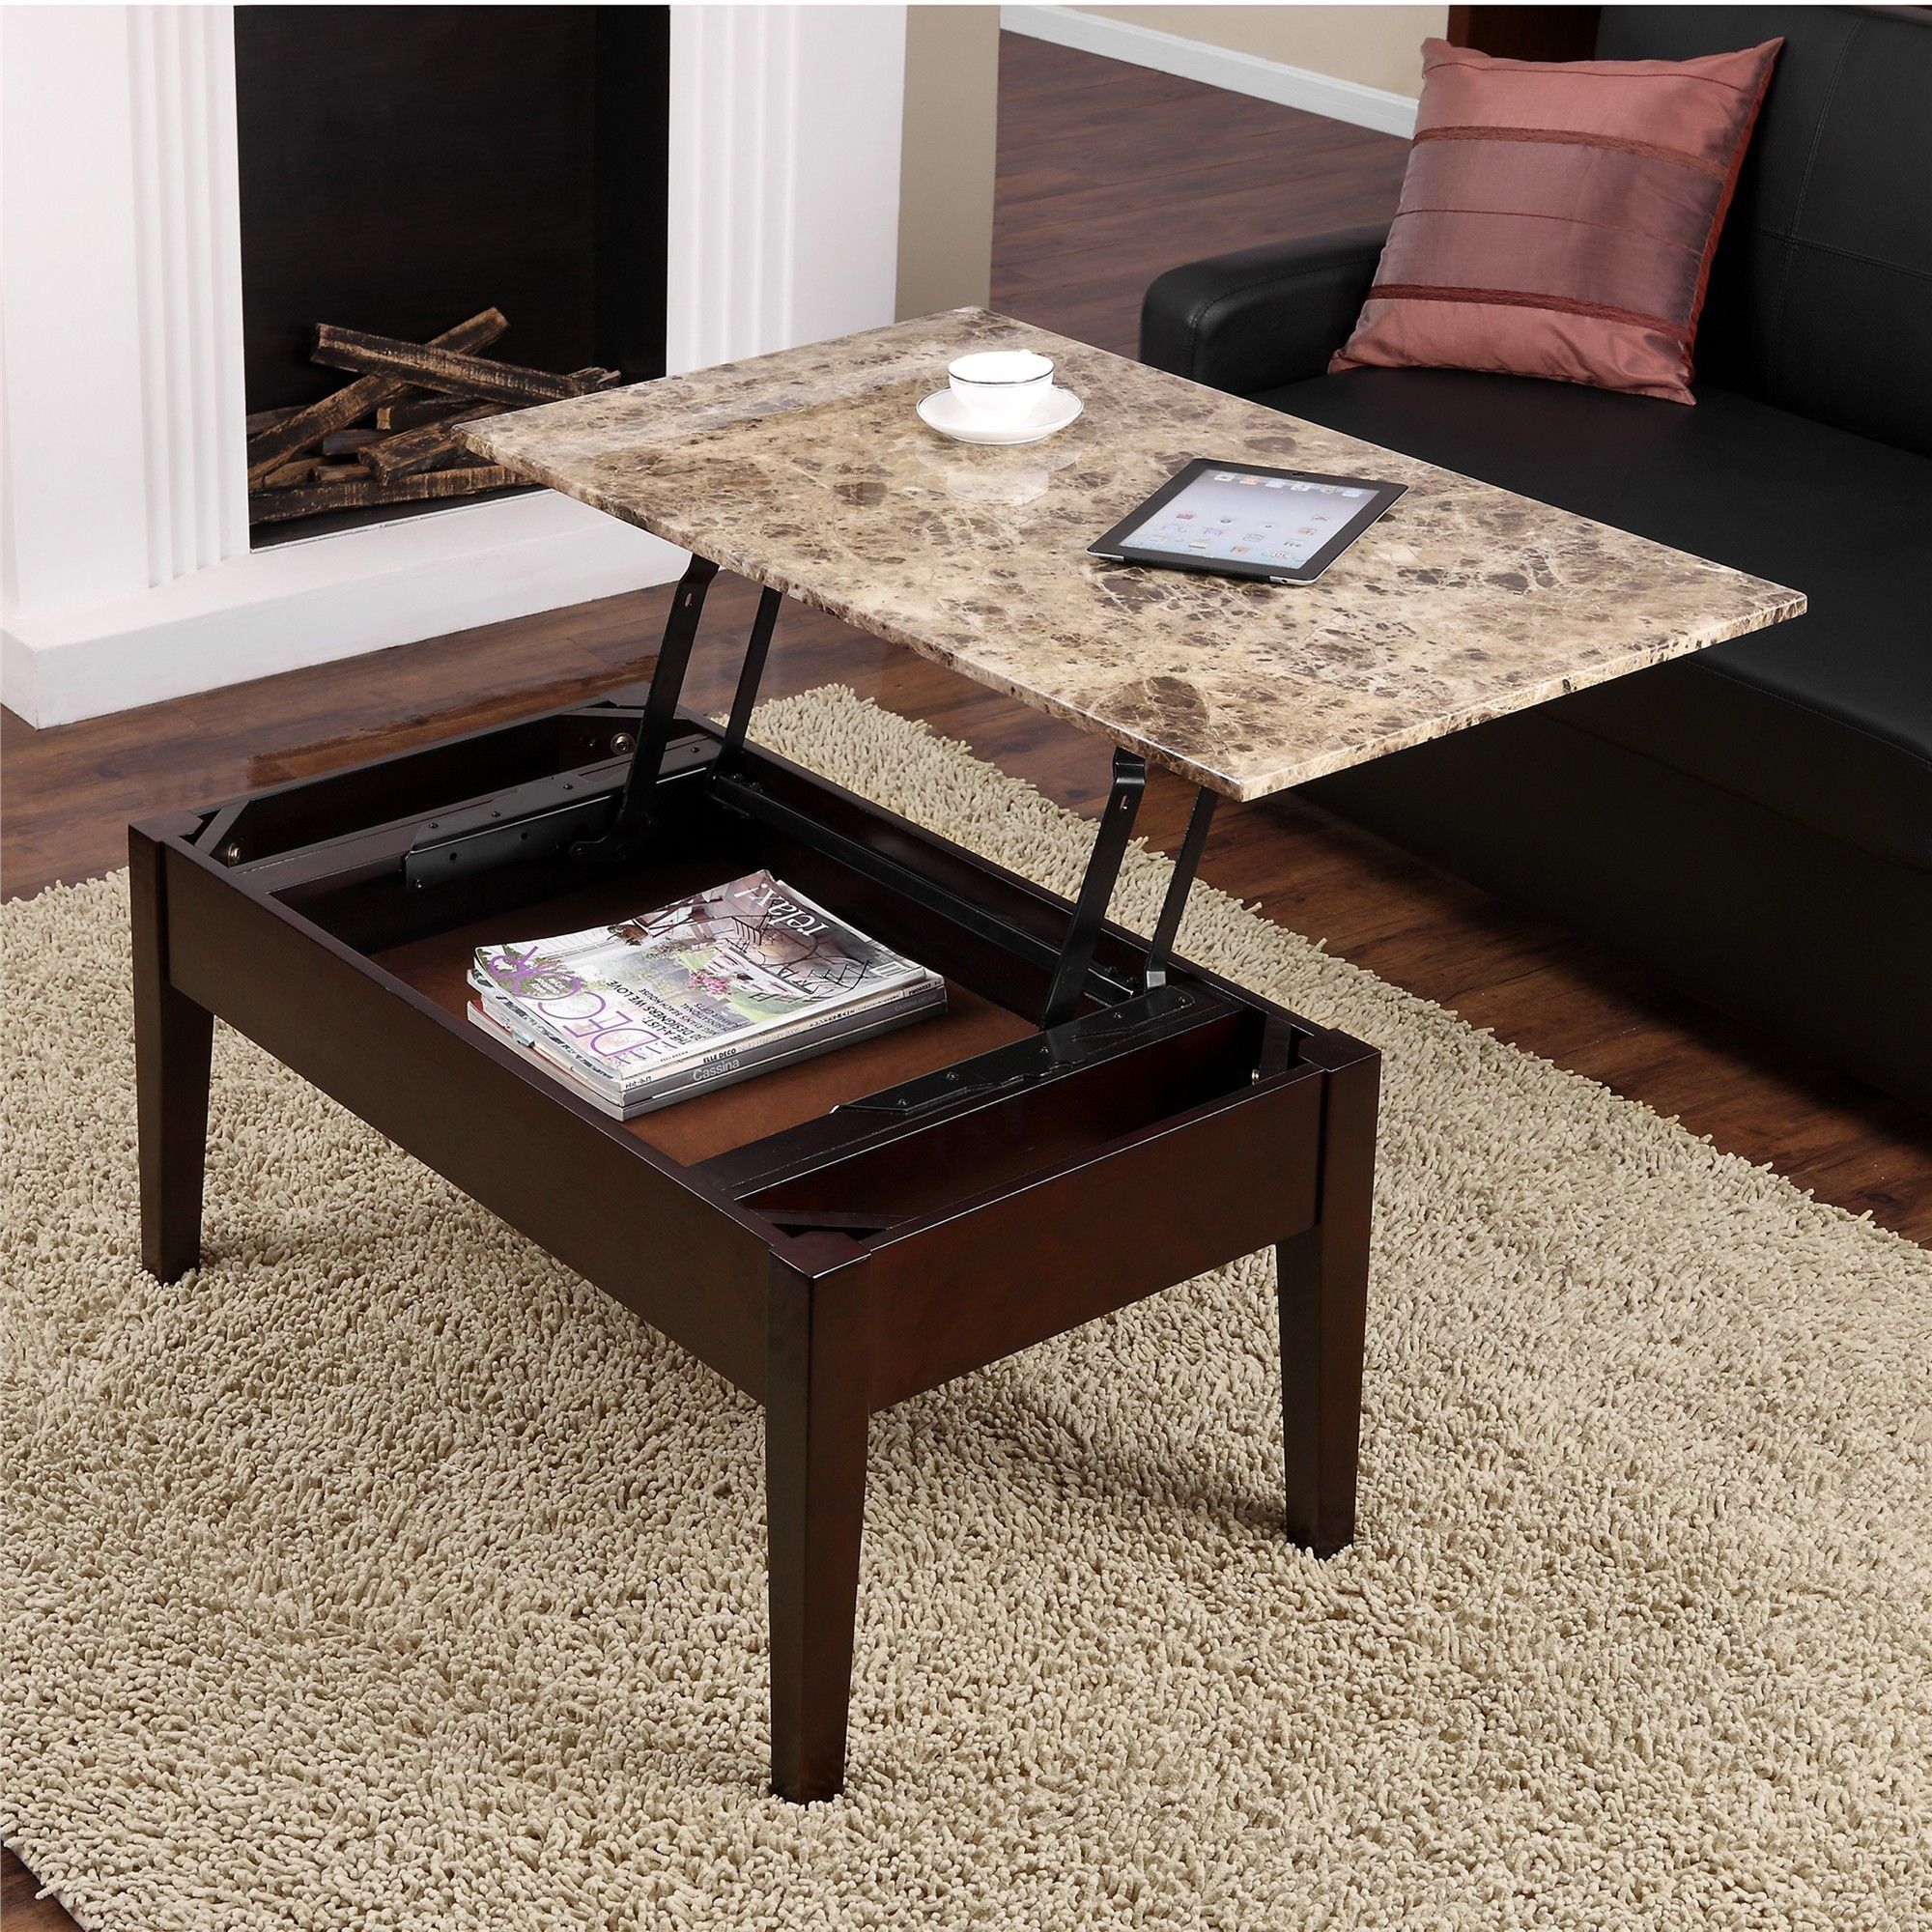 Dorel Living Faux Marble Lift Top Coffee Table – – 11190142 | Coffee Inside Lift Top Coffee Tables With Storage Drawers (Gallery 19 of 20)